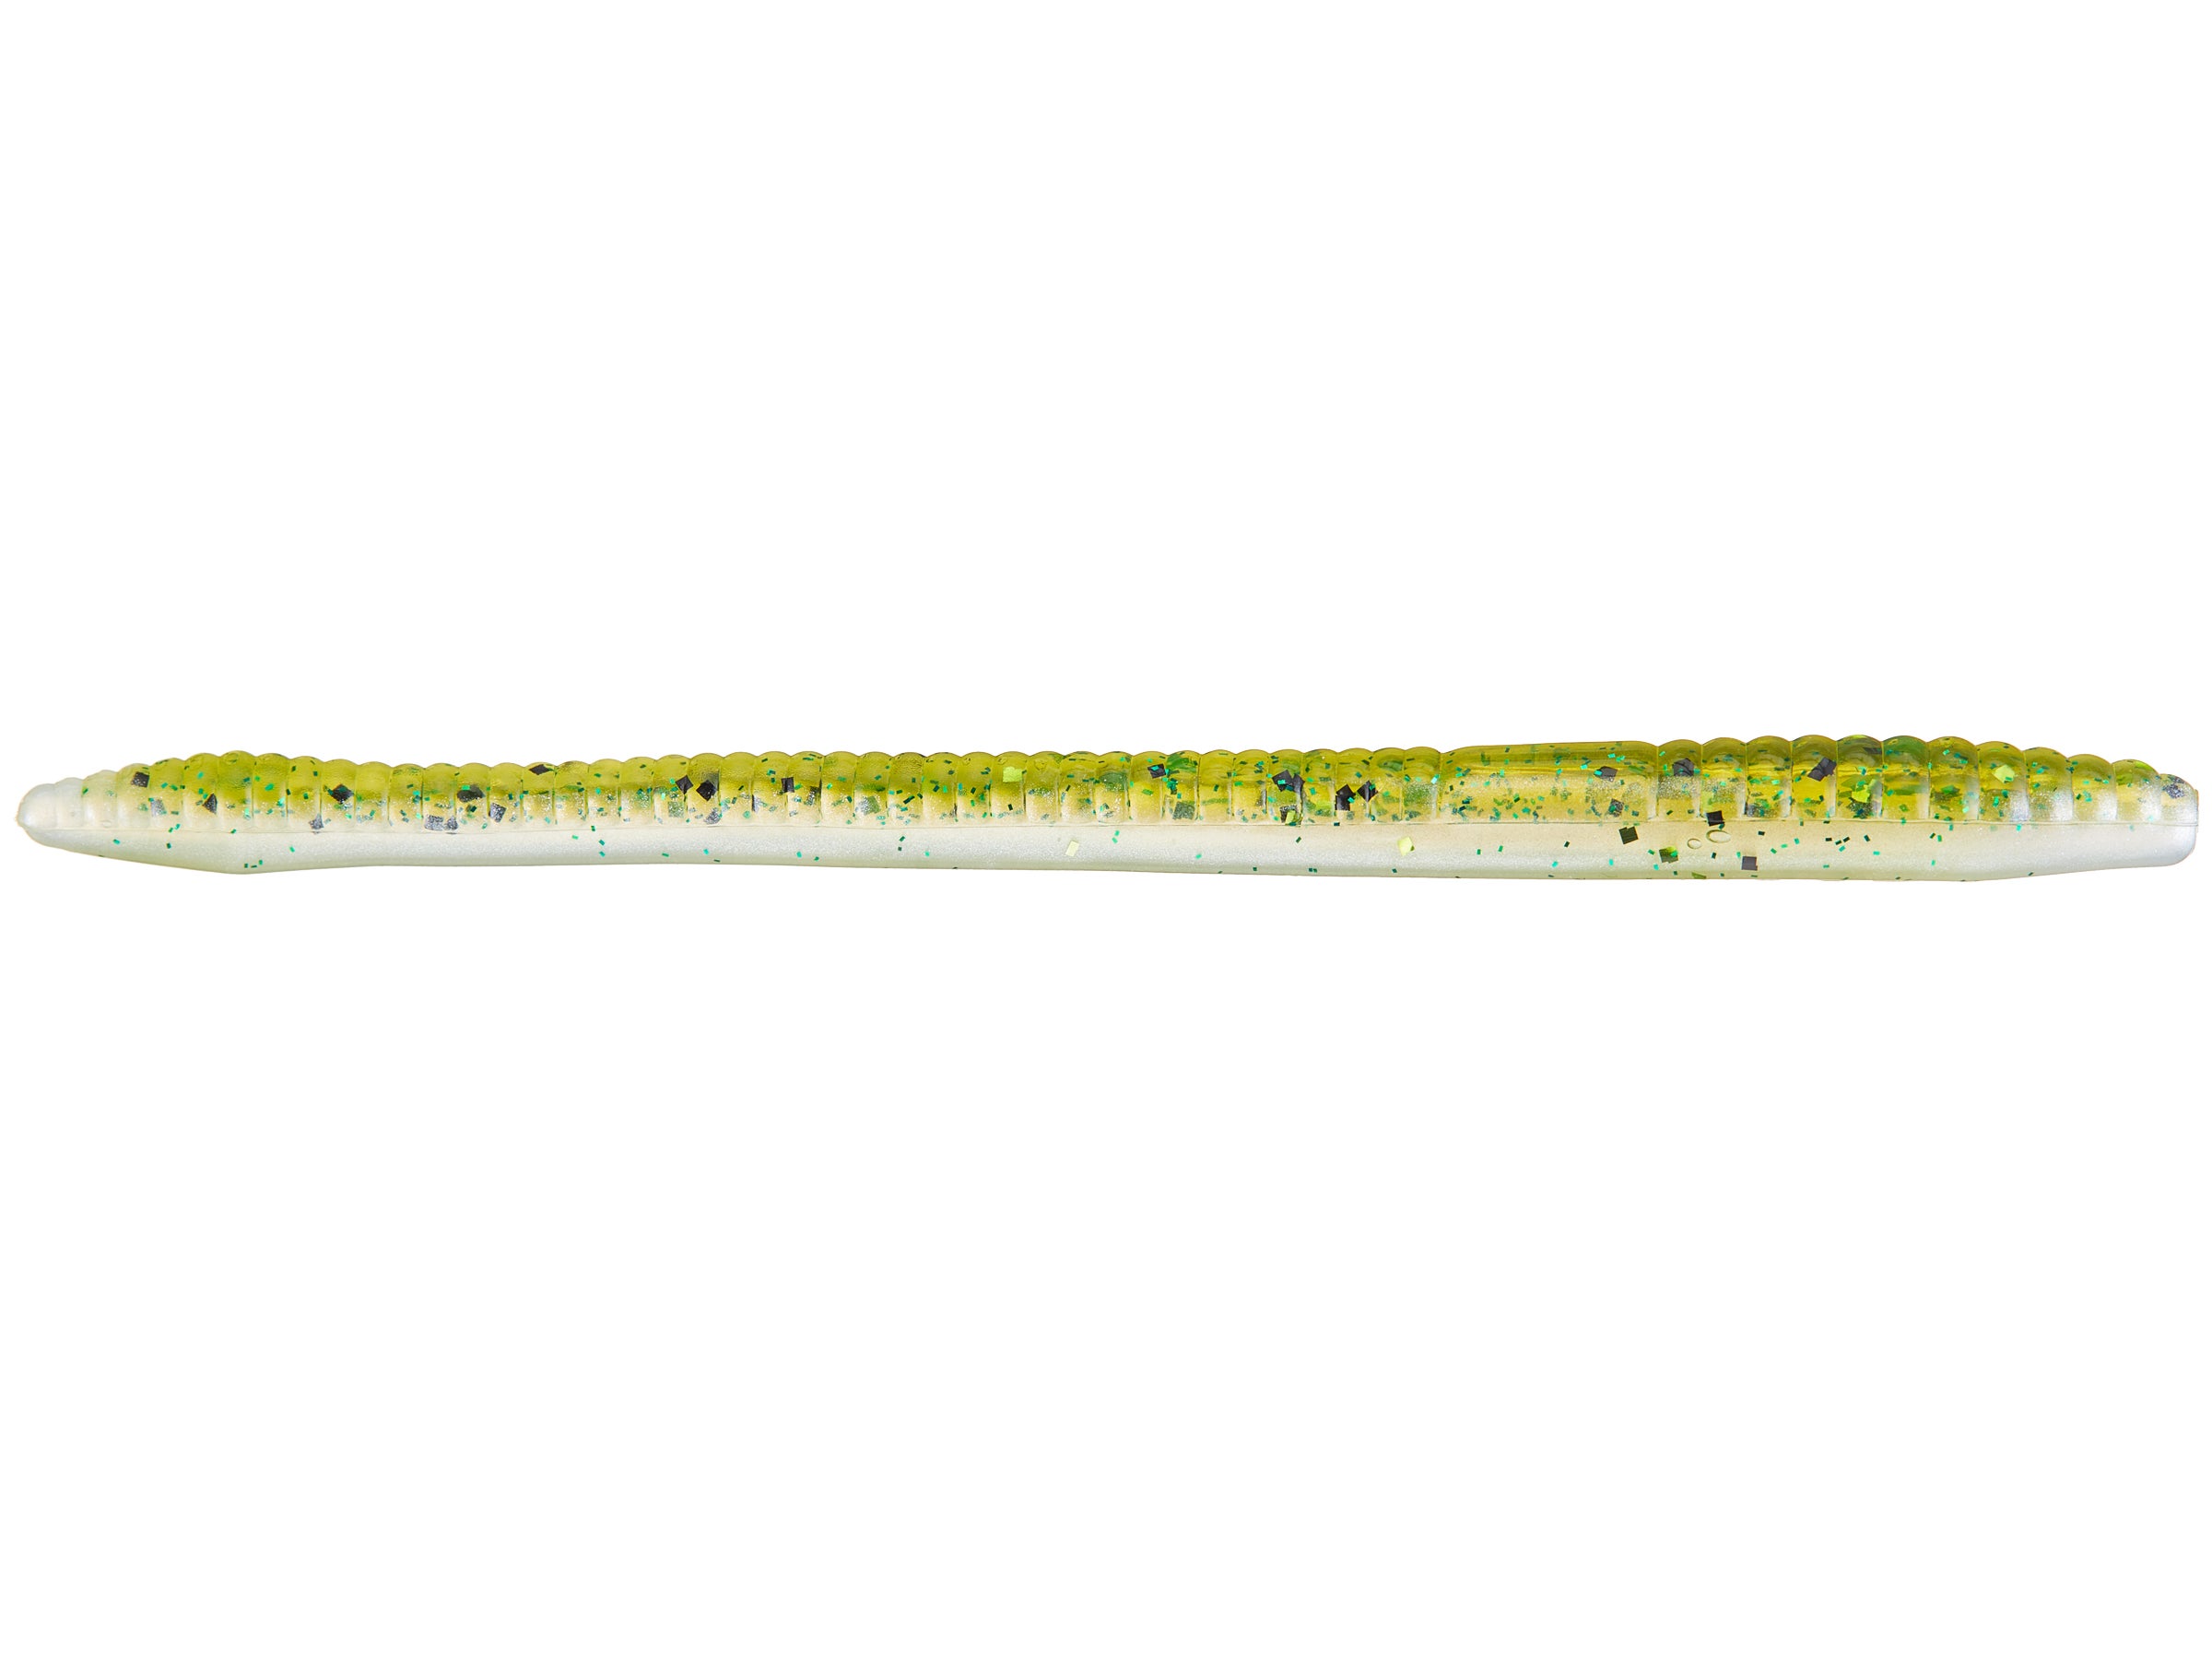 Pick Colors 4.5" 20pk Zoom Finesse Worm